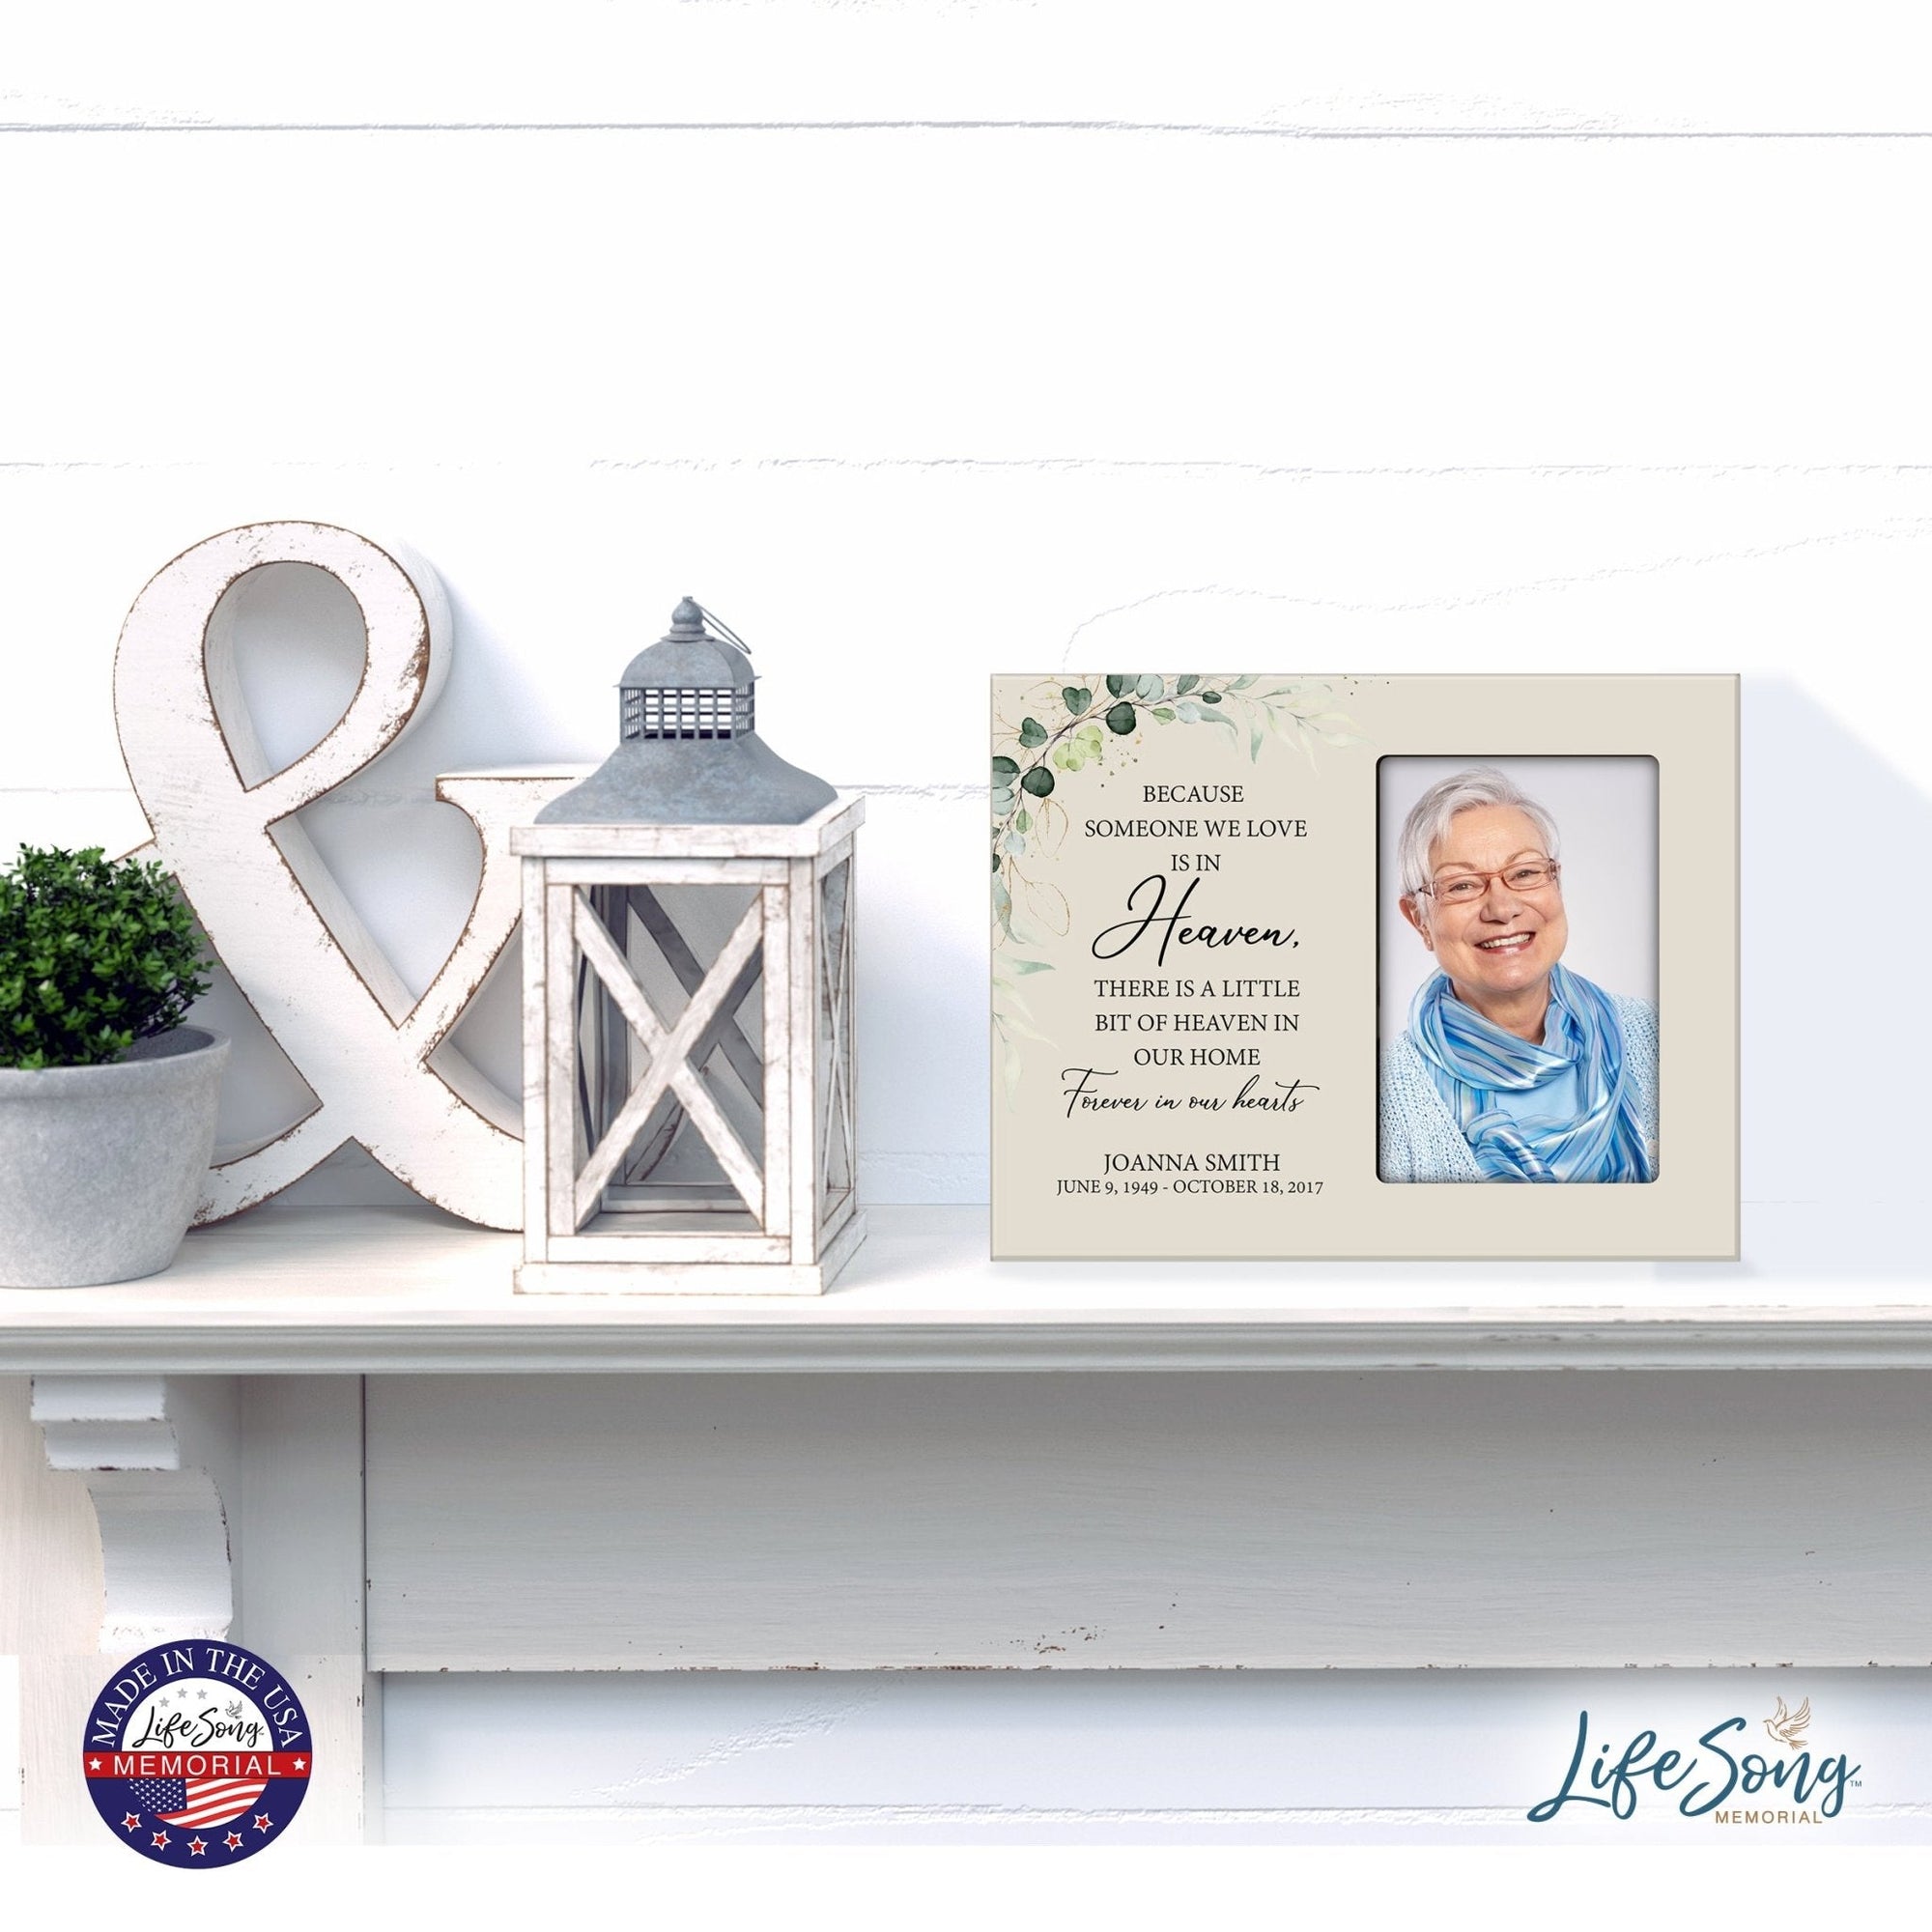 Personalized Horizontal 8x10 Wooden Memorial Picture Frame Holds 4x6 Photo - Because Someone We Love (Ivory) - LifeSong Milestones